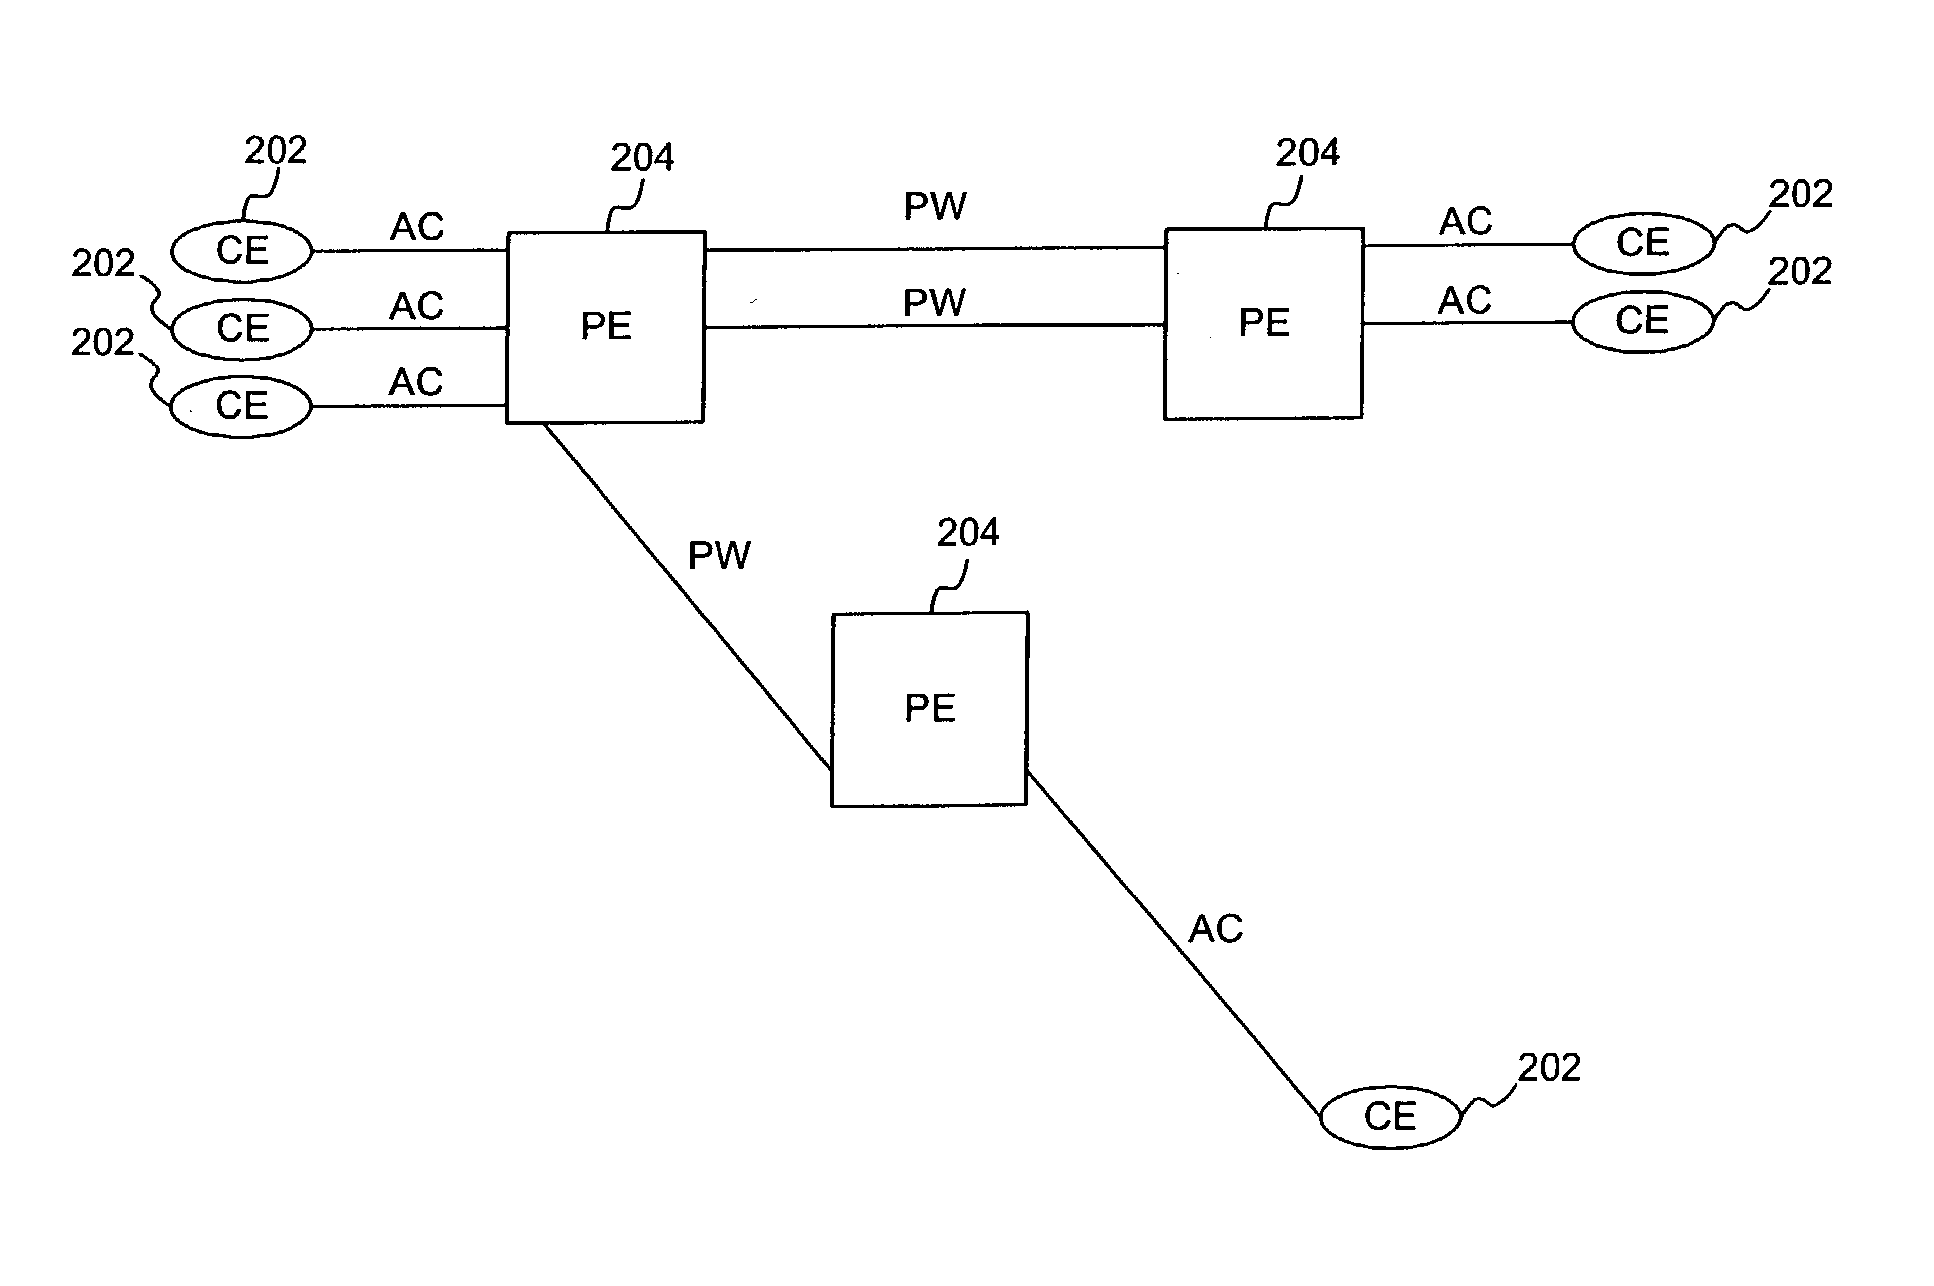 System and method for interconnecting heterogeneous layer 2 VPN applications